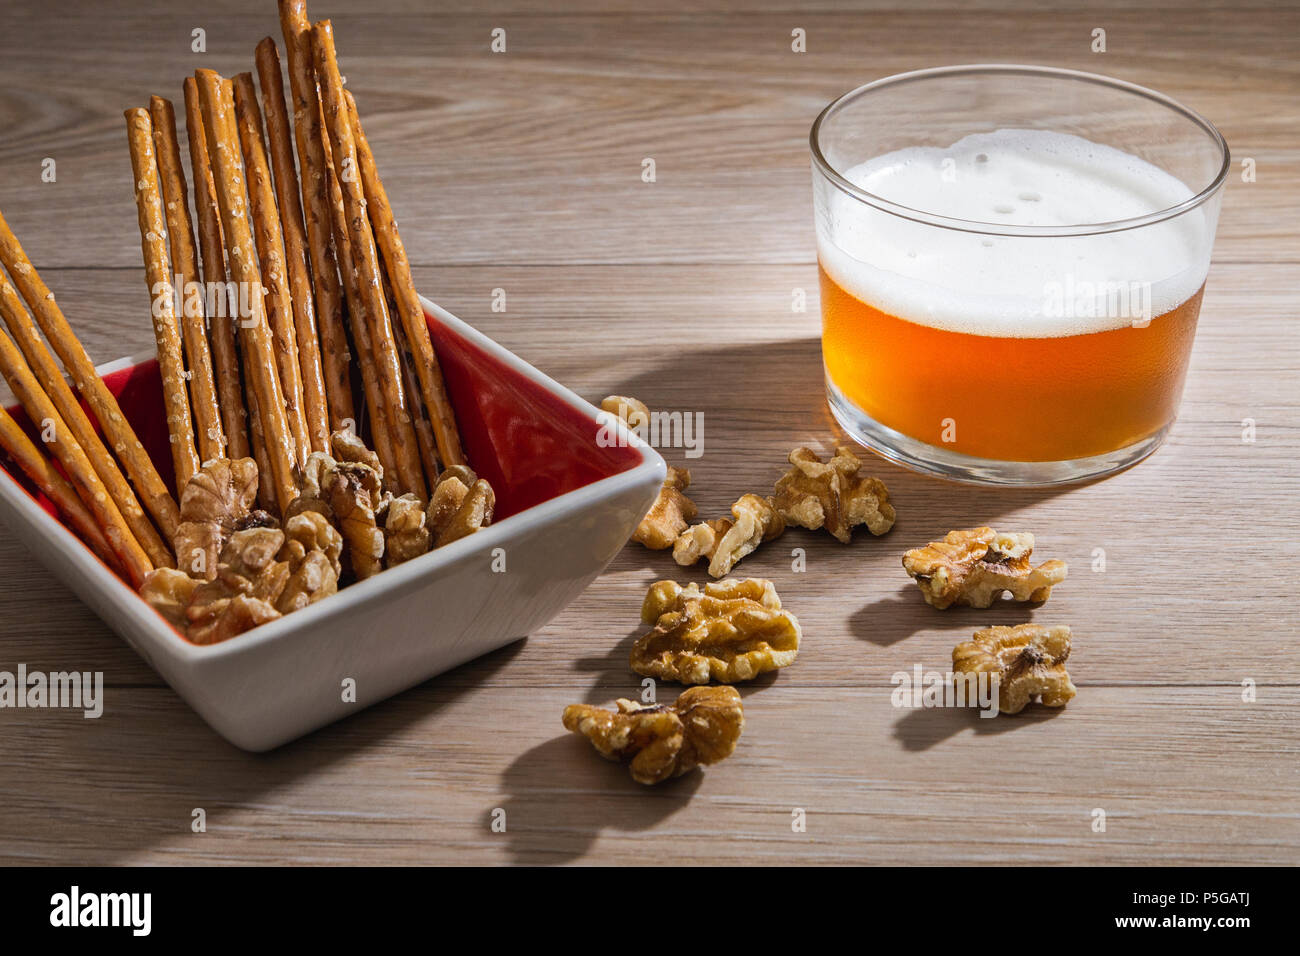 Appetizer with beer and nuts Stock Photo